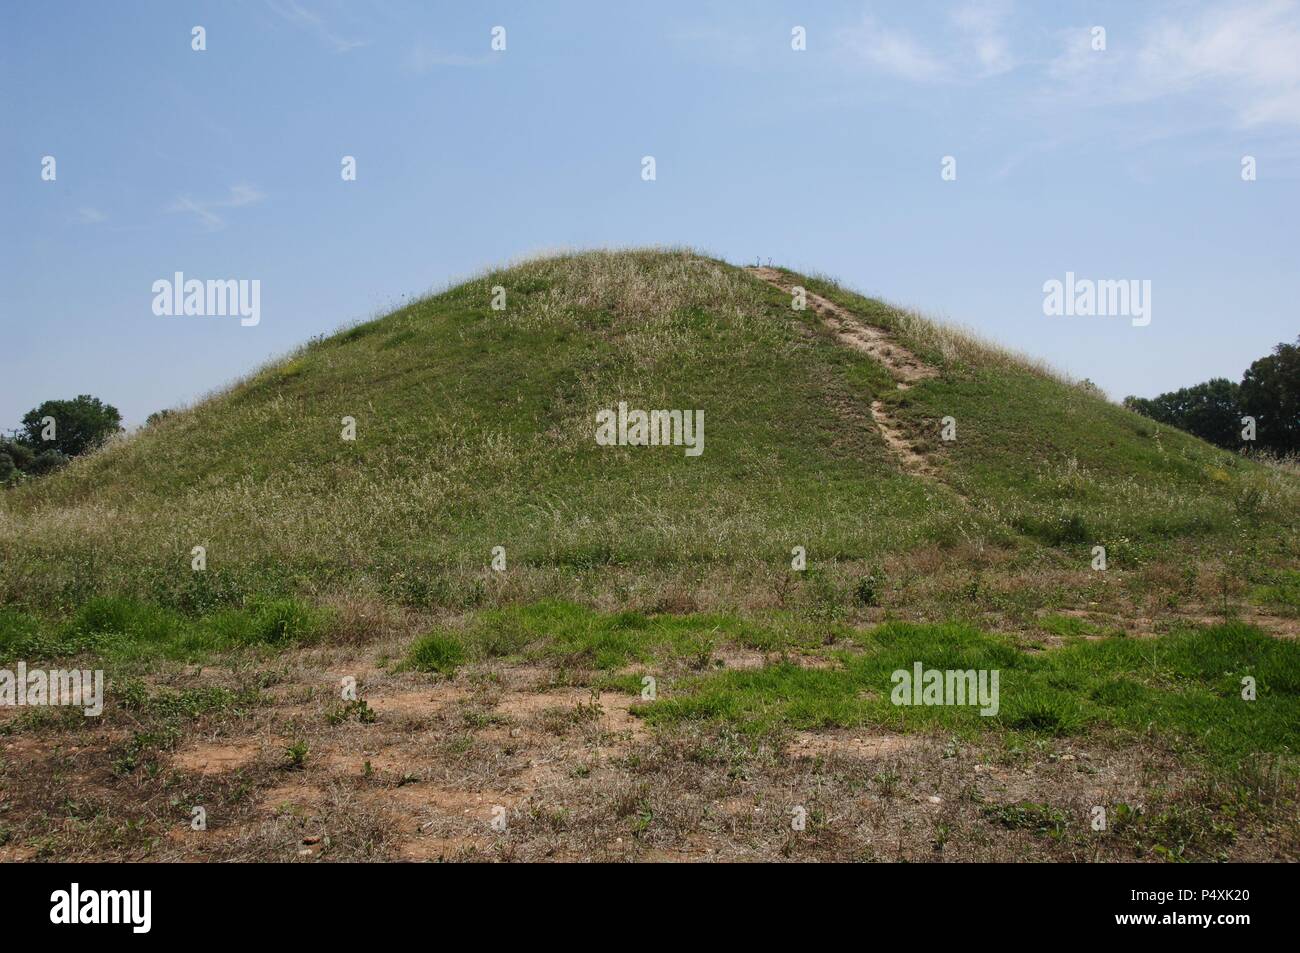 Soros or Tumulus of Marathon. Burial mound for the 192 athenian dead at the Battle of Marathon (490 BC) between Persians and athenian army. Near Athens. Greece. Stock Photo